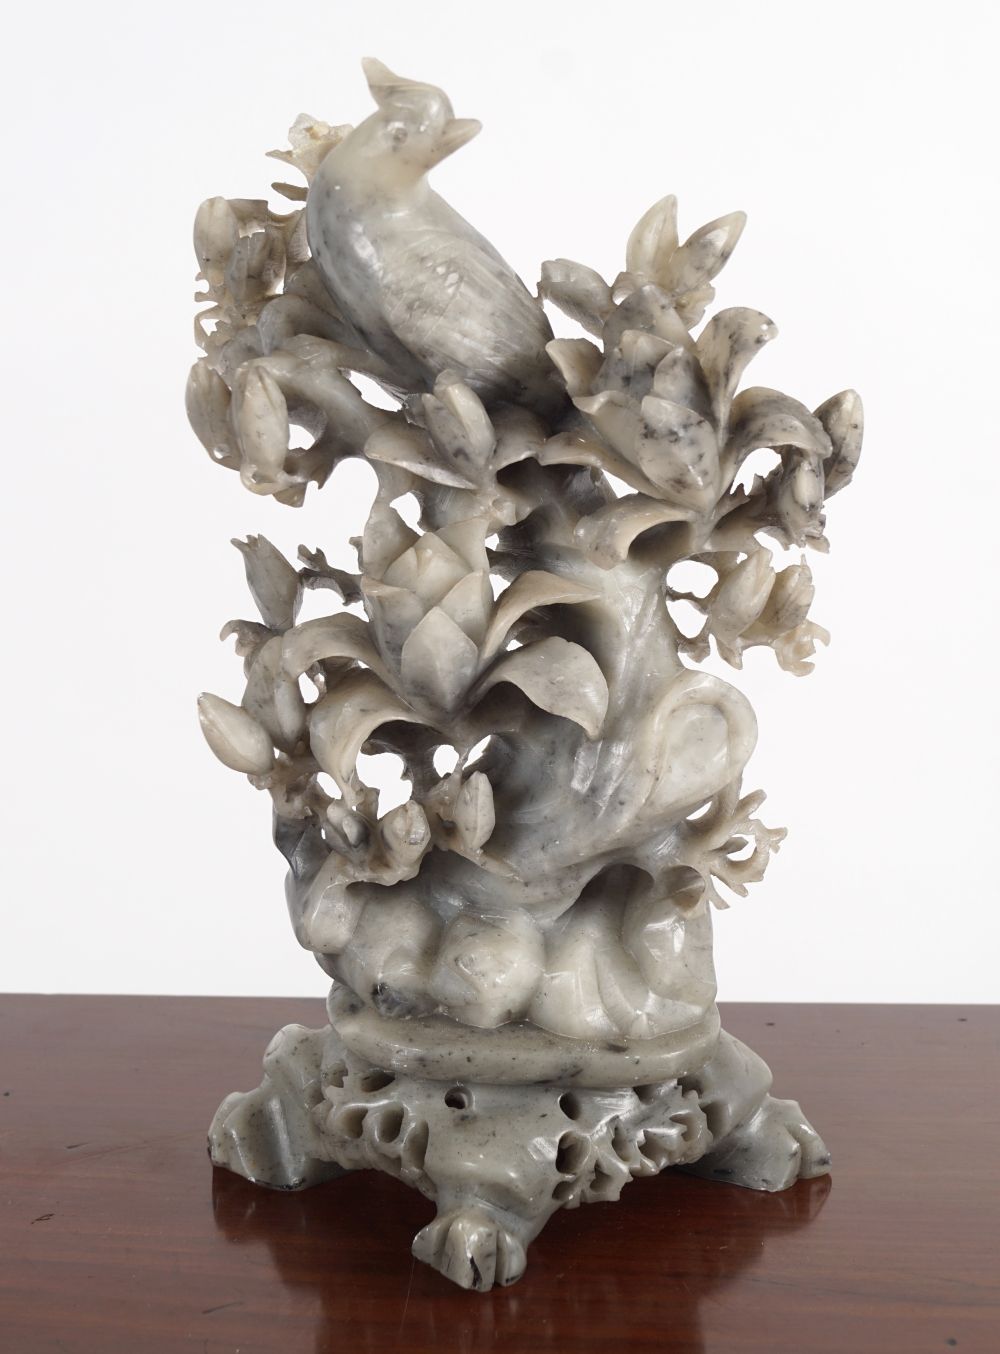 CARVED 19TH-CENTURY CHINESE SOAPSTONE SCULPTURE